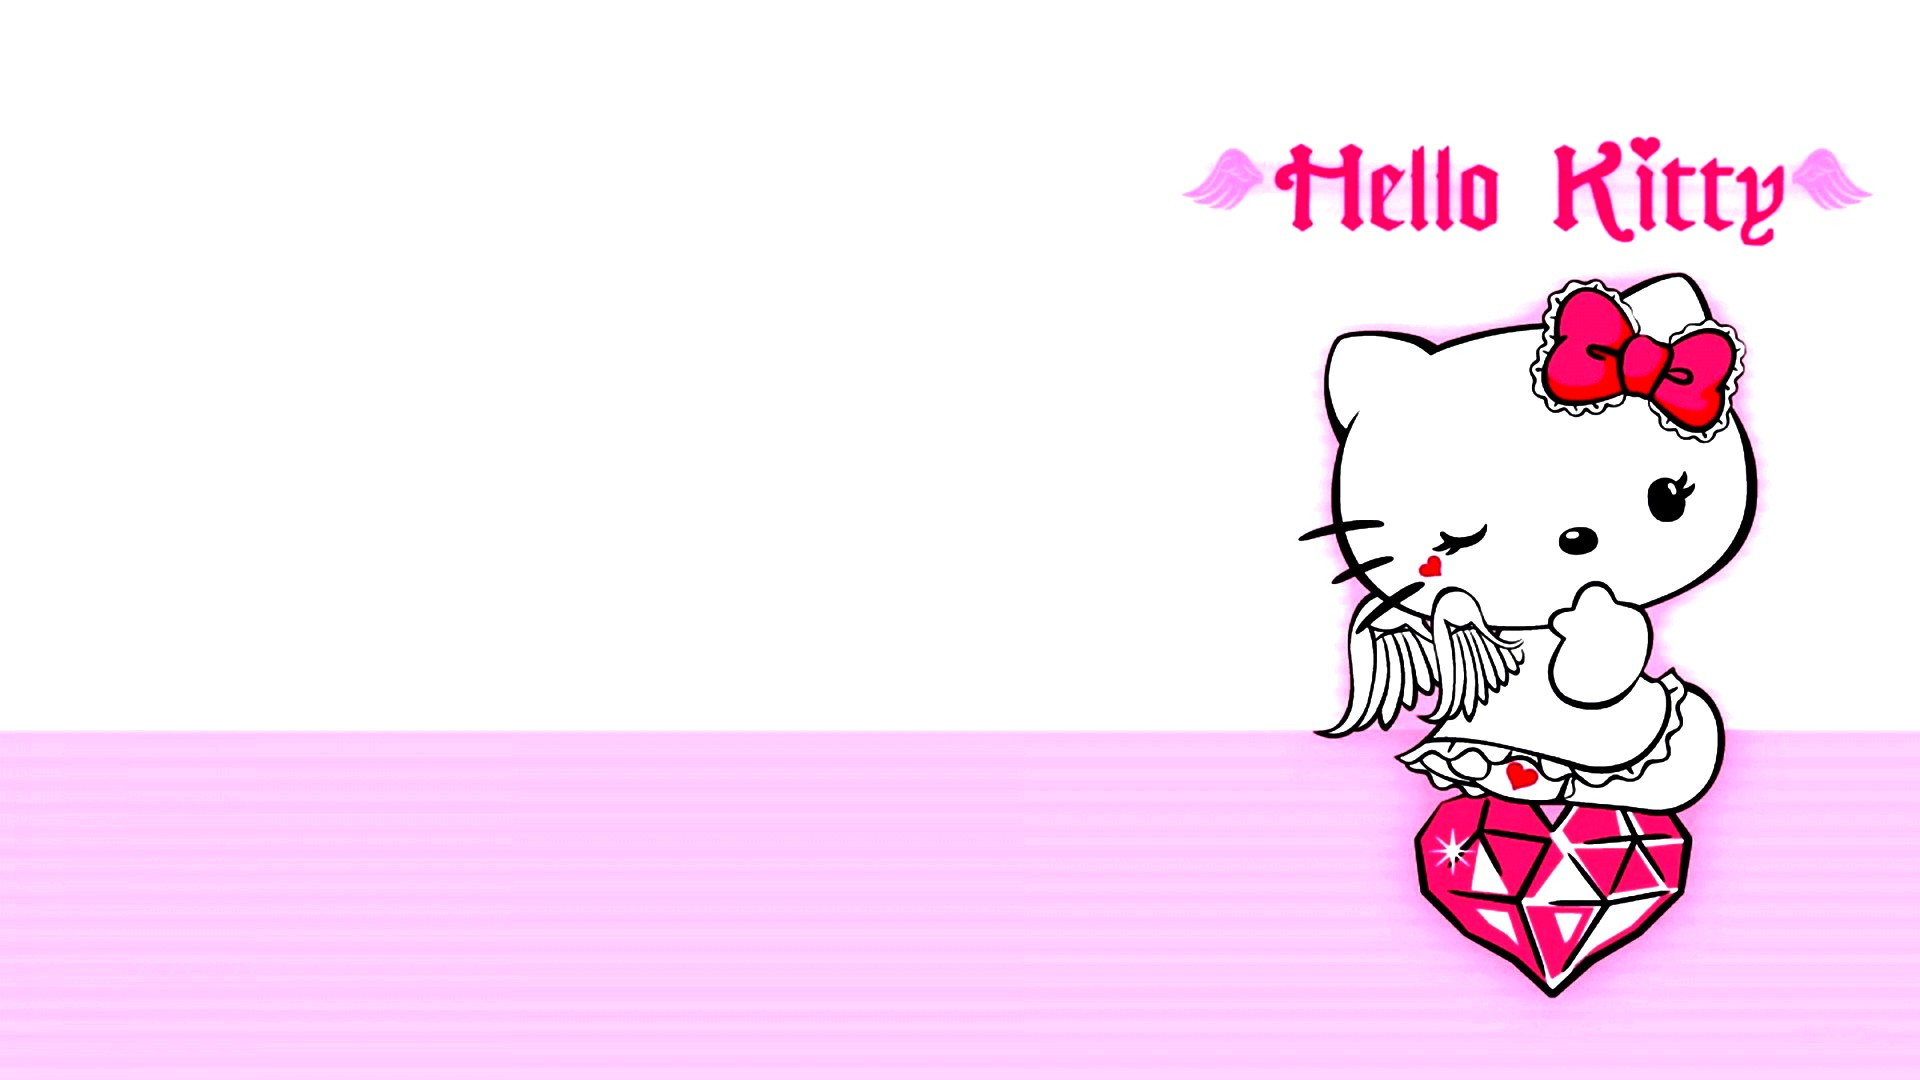 Hello Kitty Wallpaper HD with high-resolution 1920x1080 pixel. You can use and set as wallpaper for Notebook Screensavers, Mac Wallpapers, Mobile Home Screen, iPhone or Android Phones Lock Screen